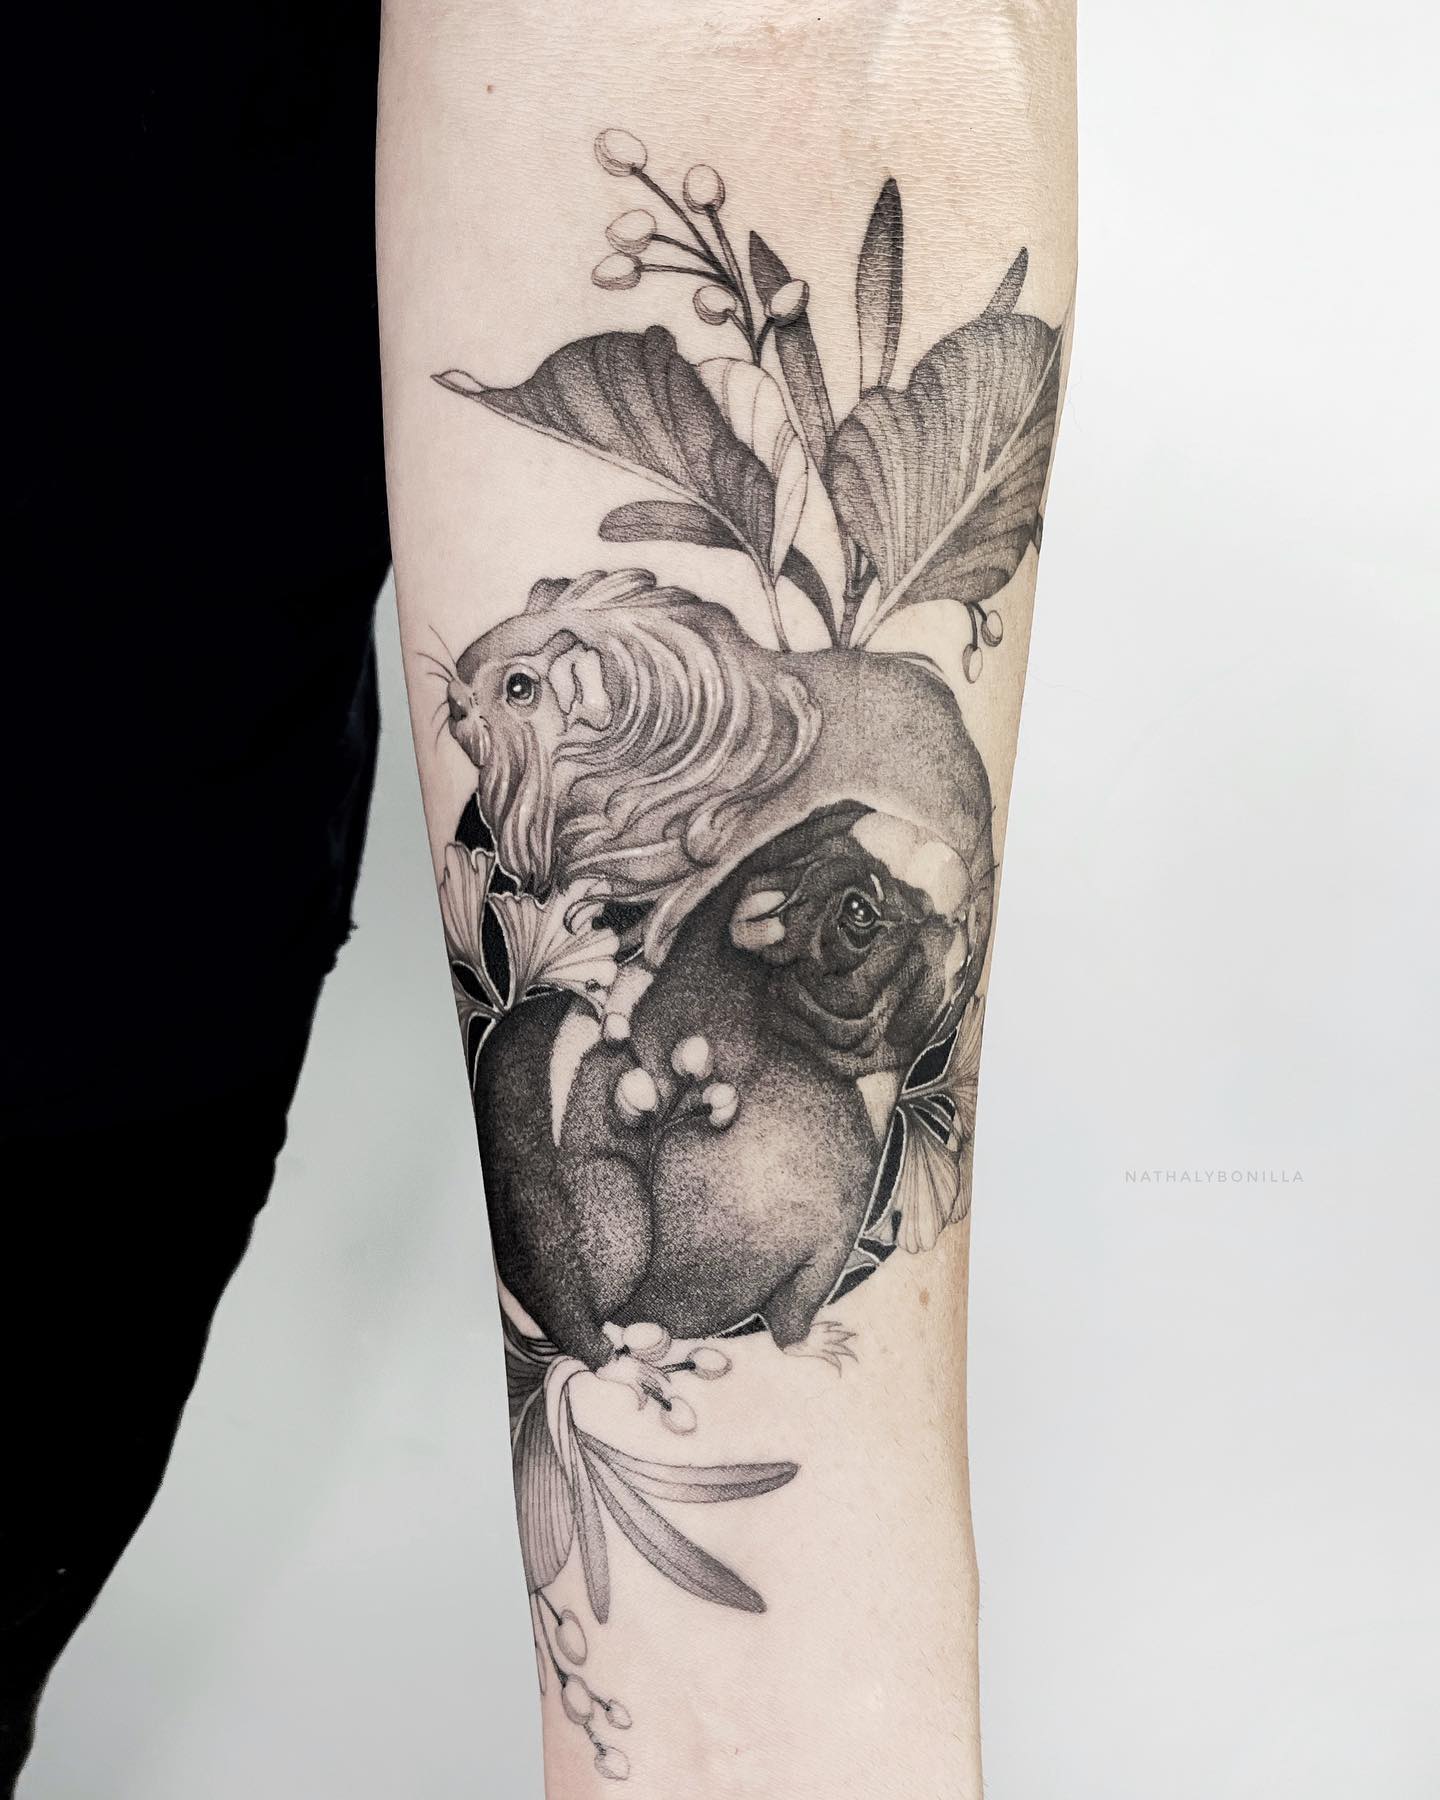 Black and White Floral and Bulldog Tattoo on Forearm